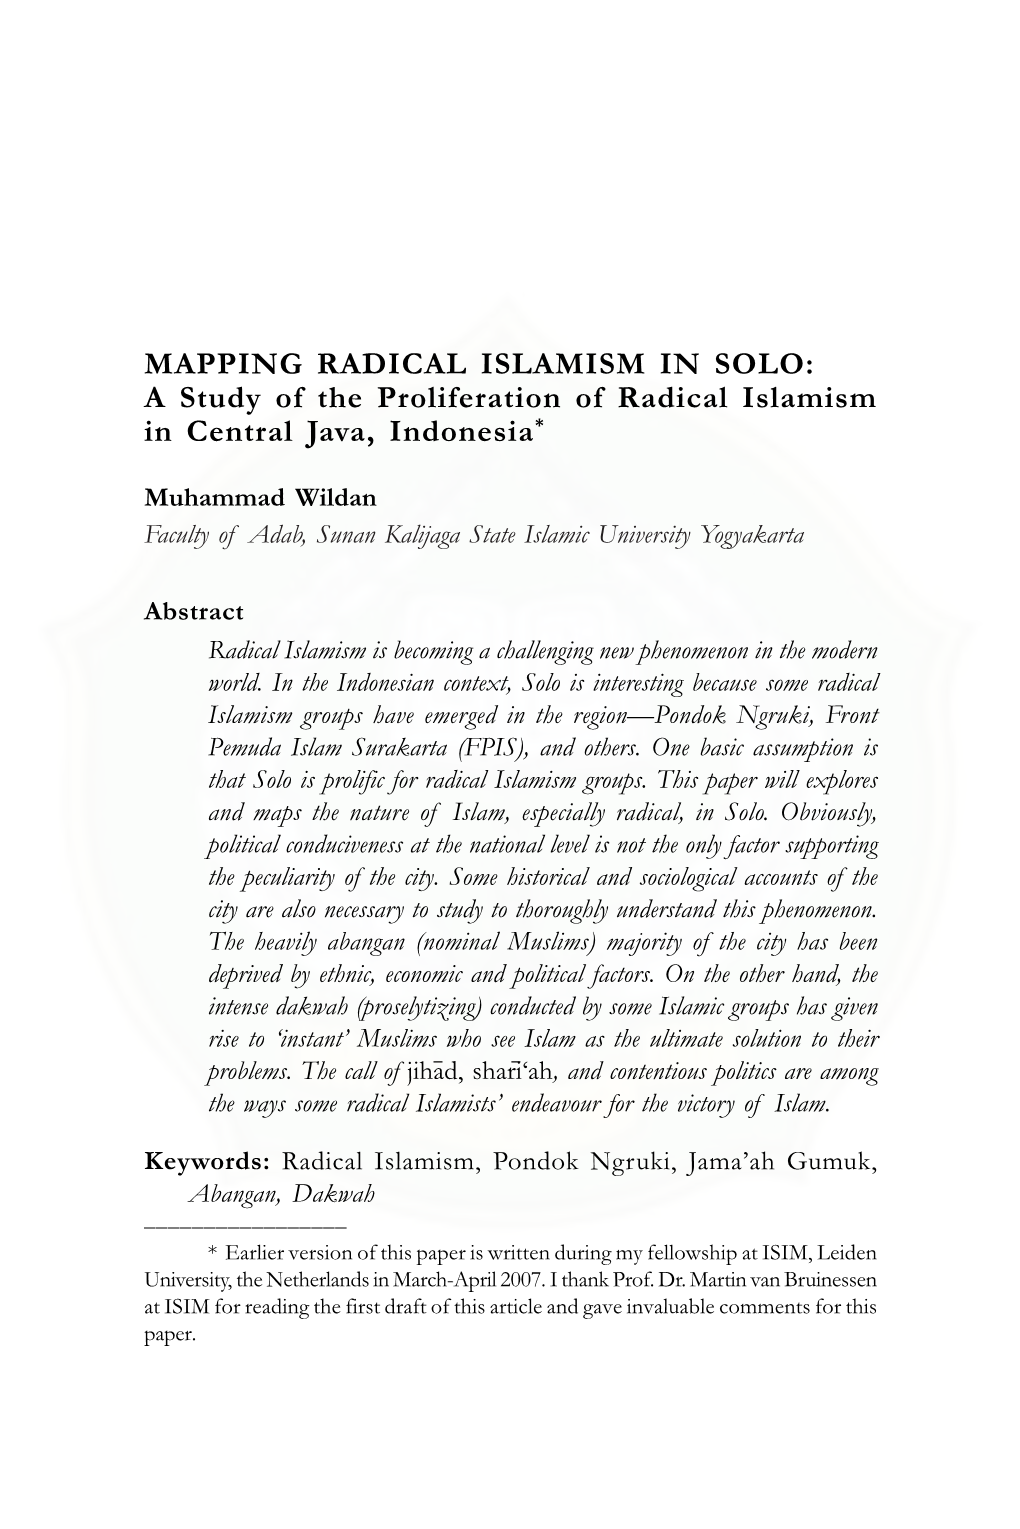 MAPPING RADICAL ISLAMISM in SOLO: a Study of the Proliferation of Radical Islamism in Central Java, Indonesia*